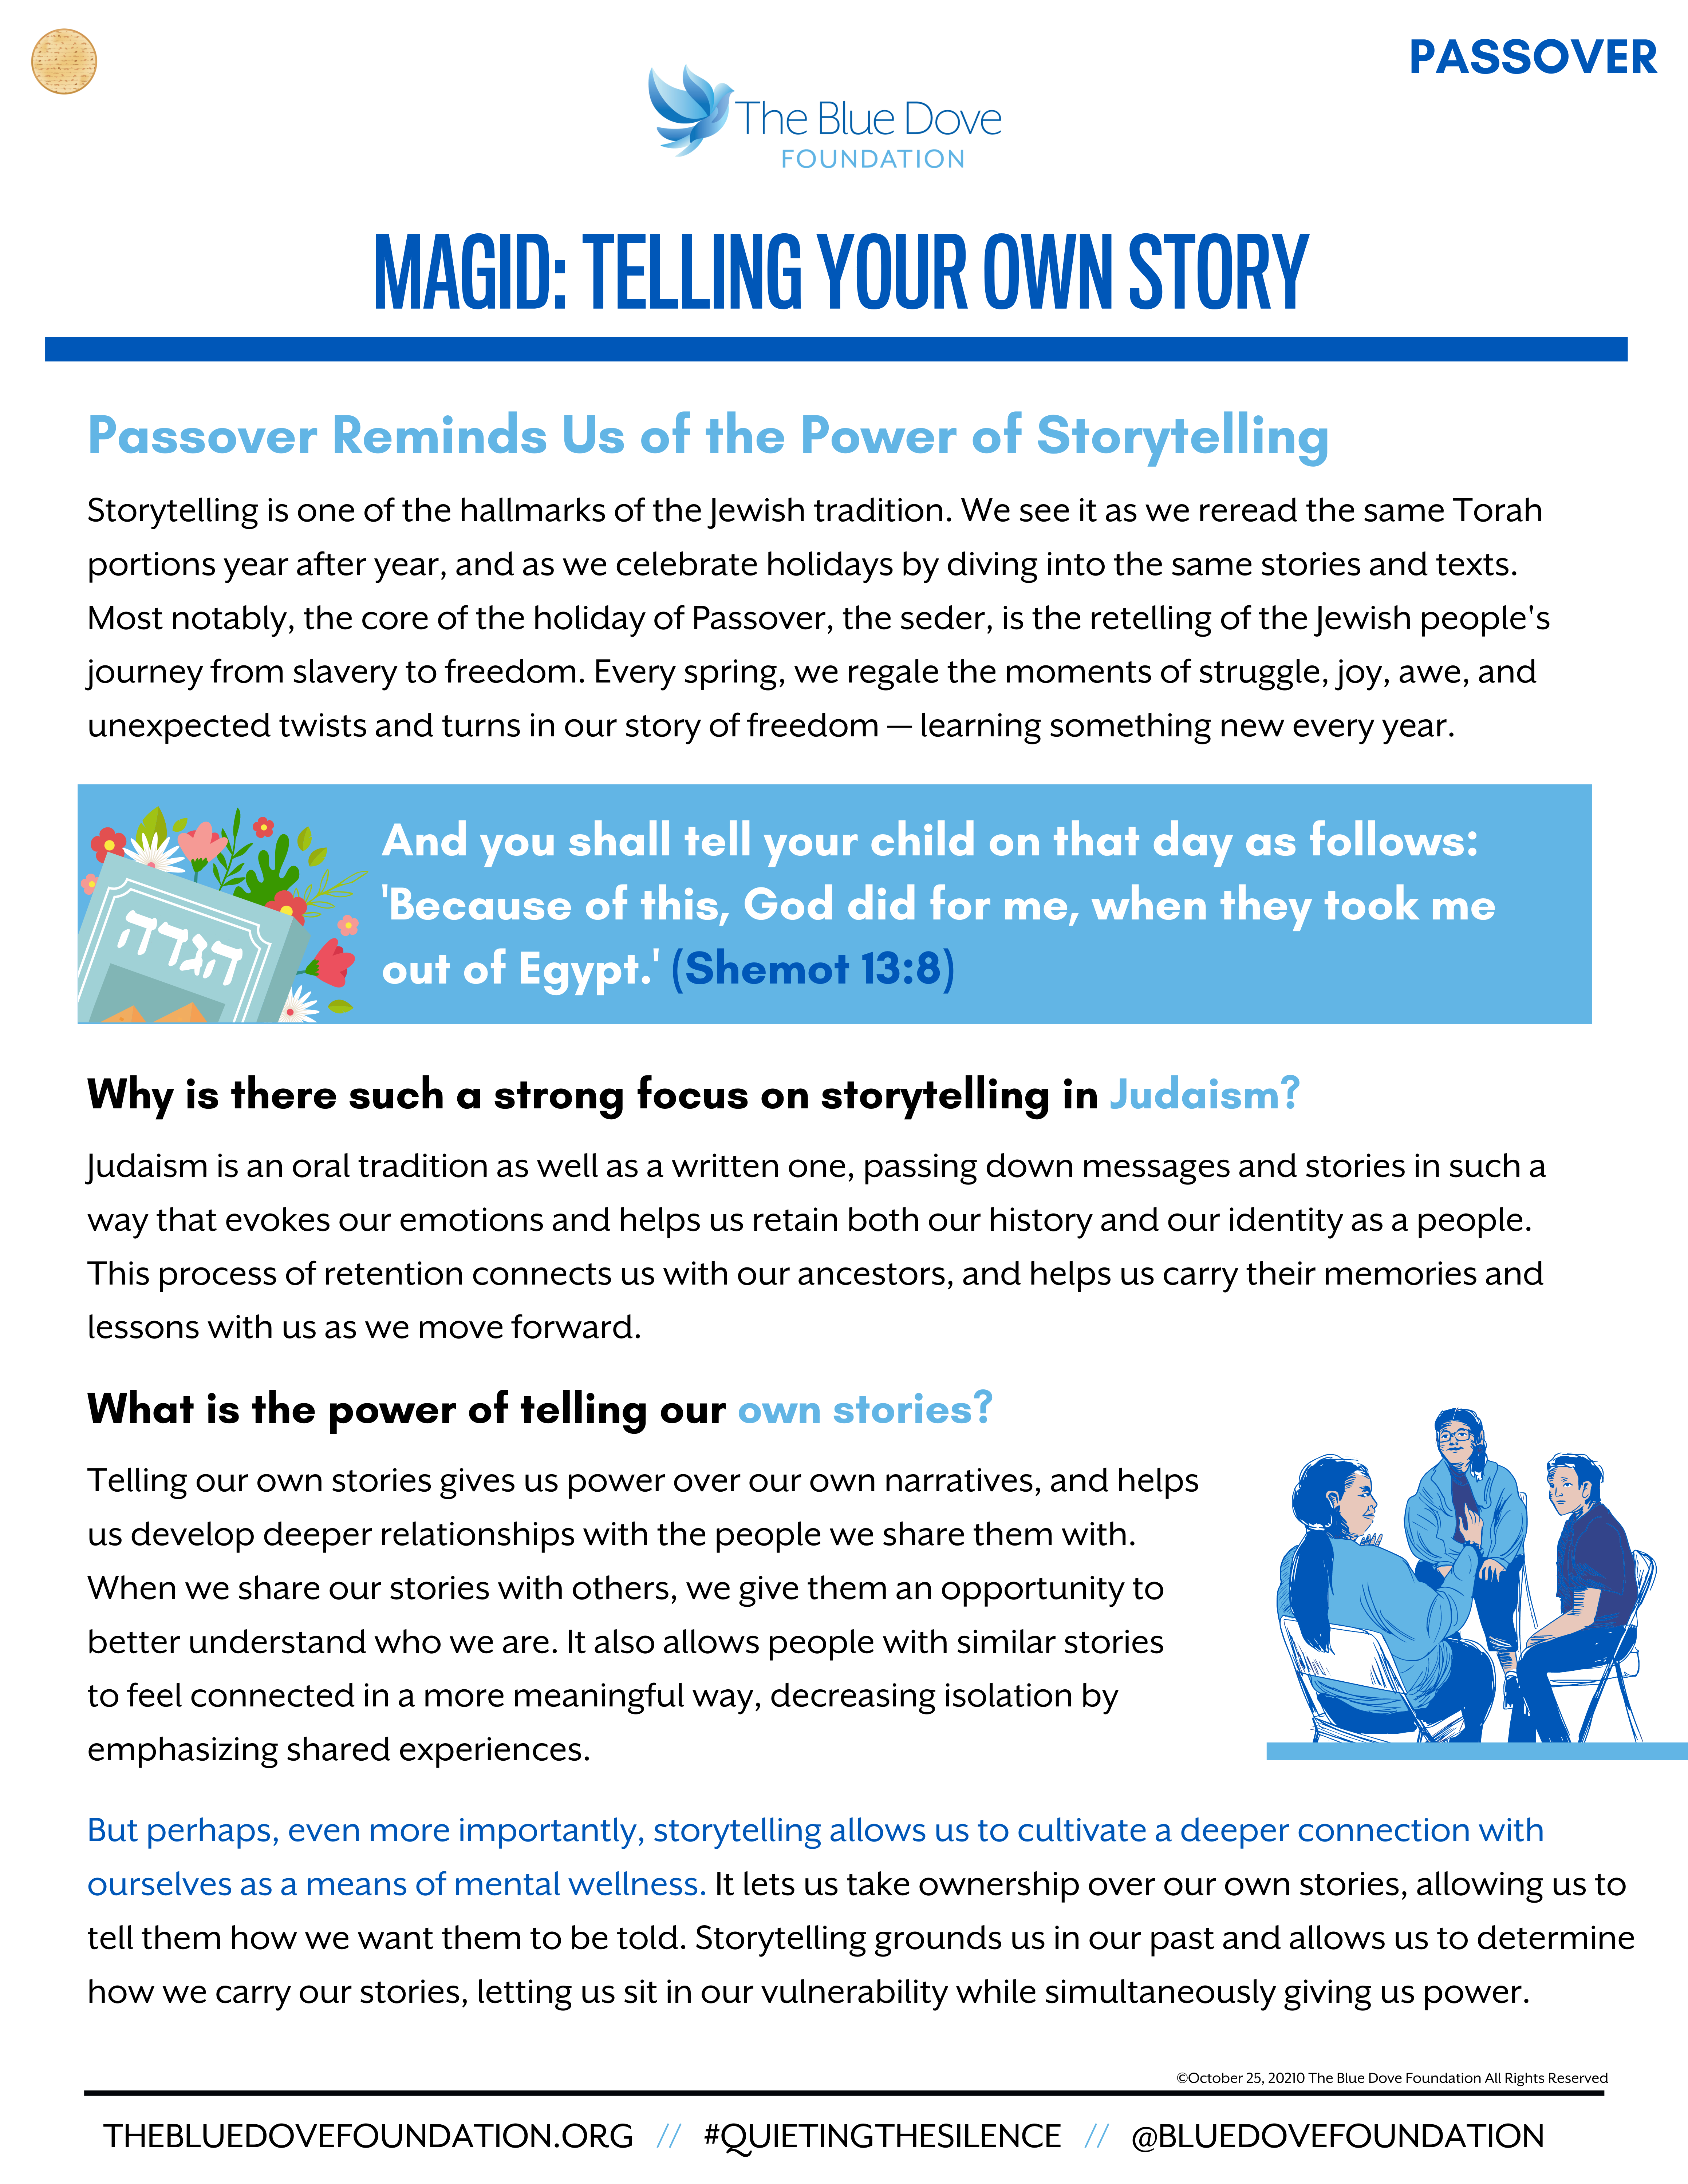 Telling YOUR OWN Story